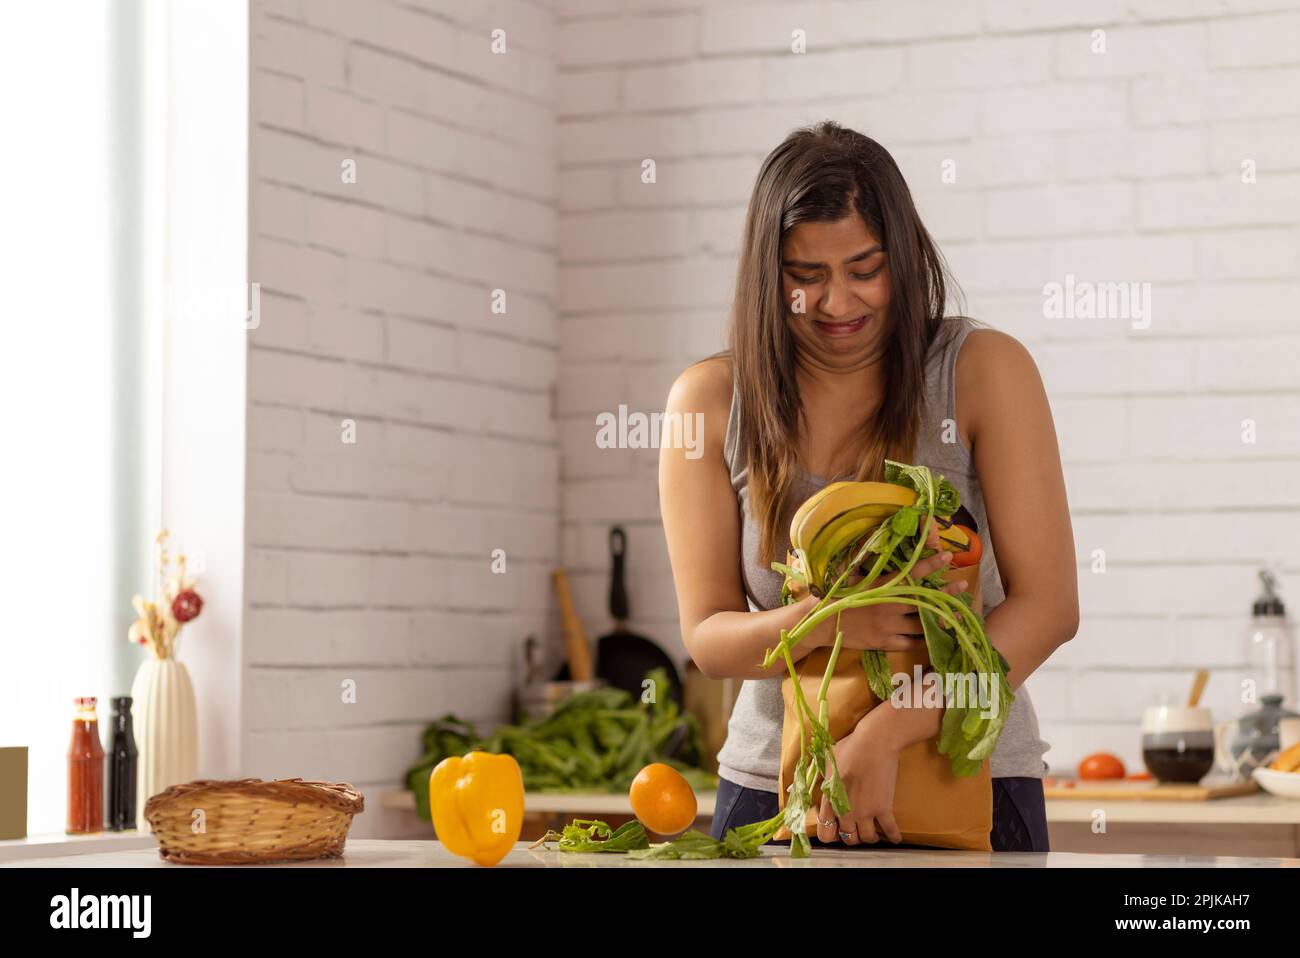 Woman standing in kitchen holding a heavy bag of vegetables Stock Photo